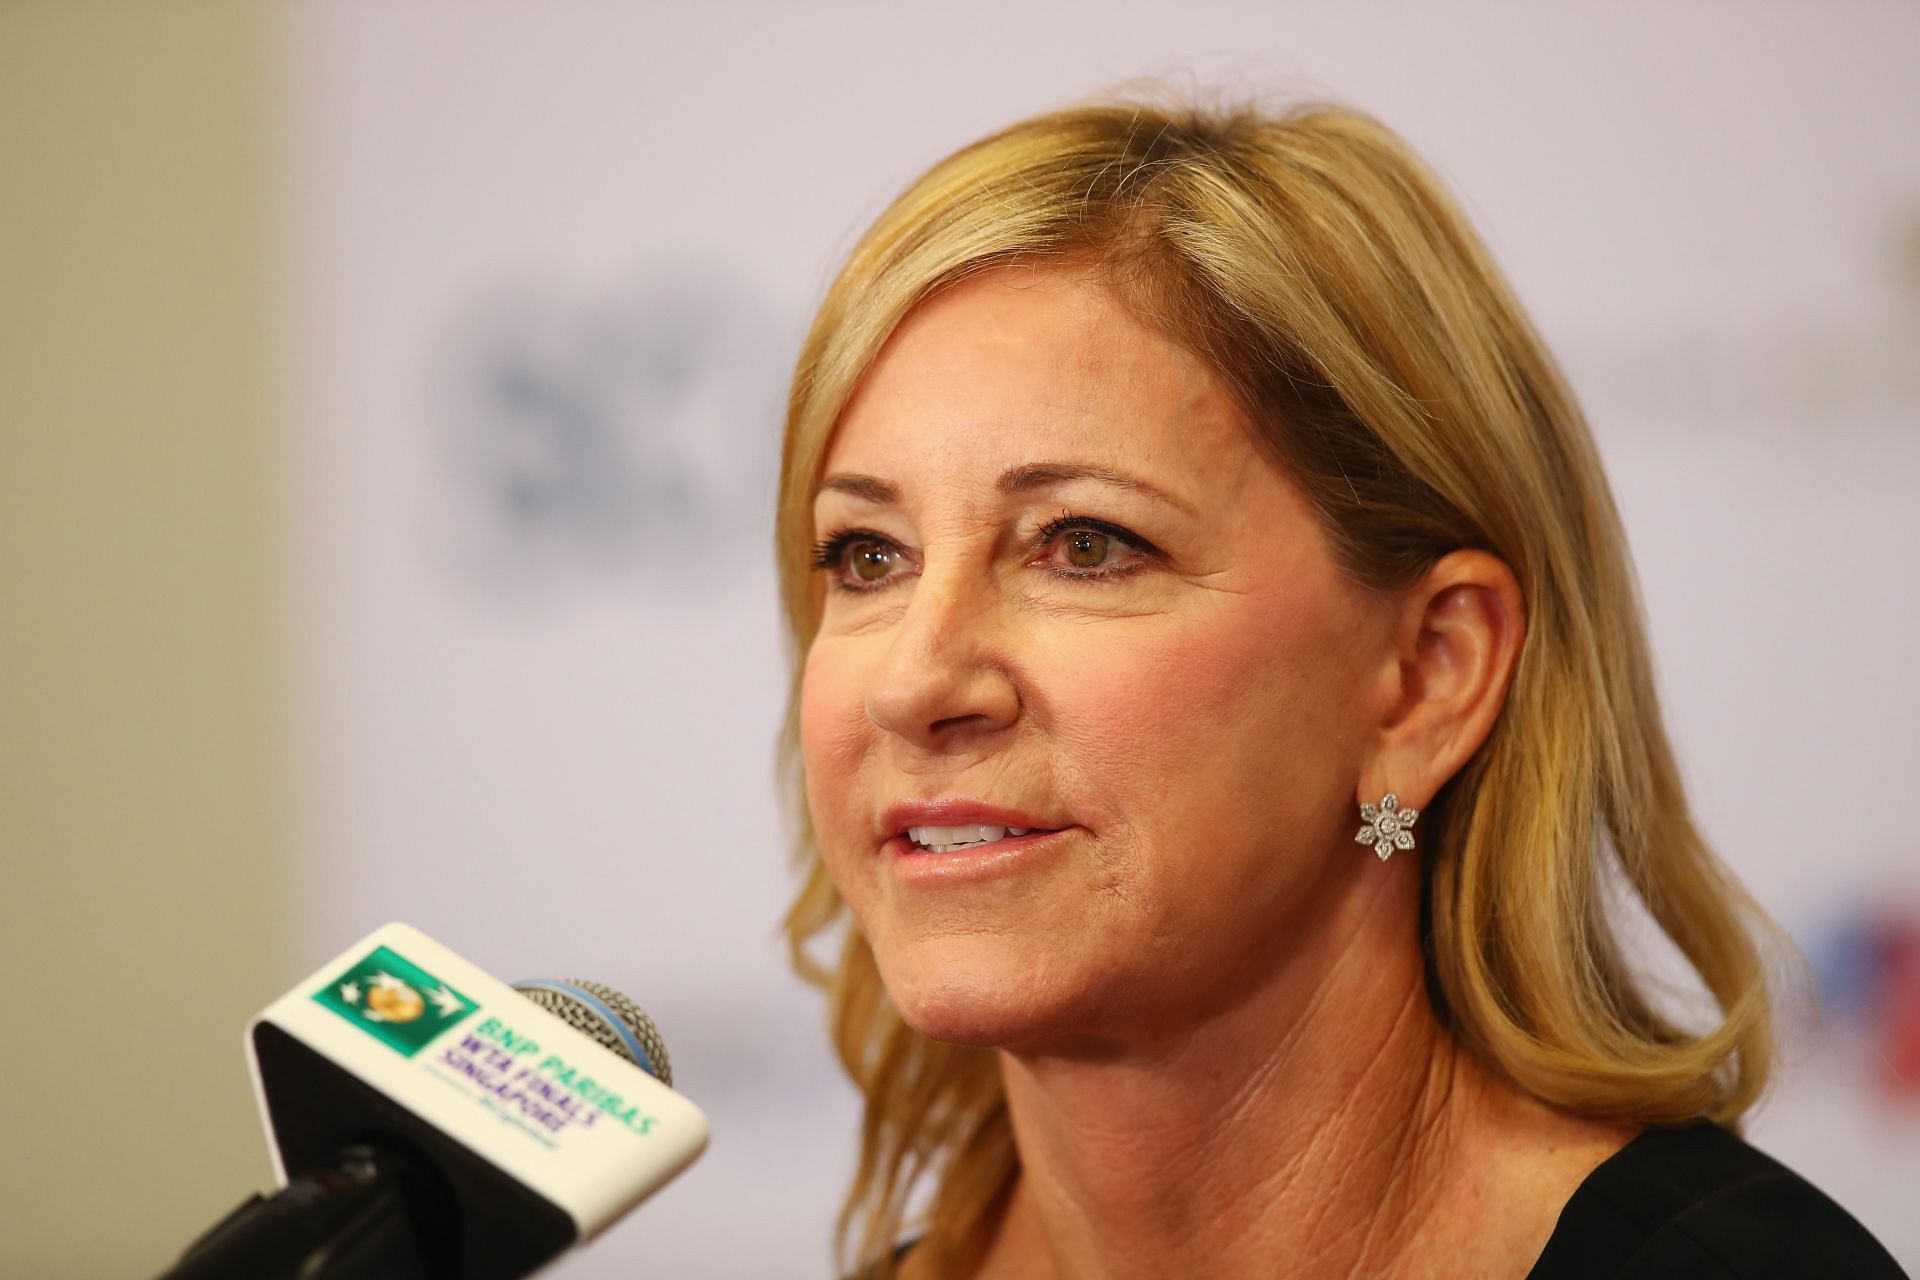 Chris Evert responded to a social media post